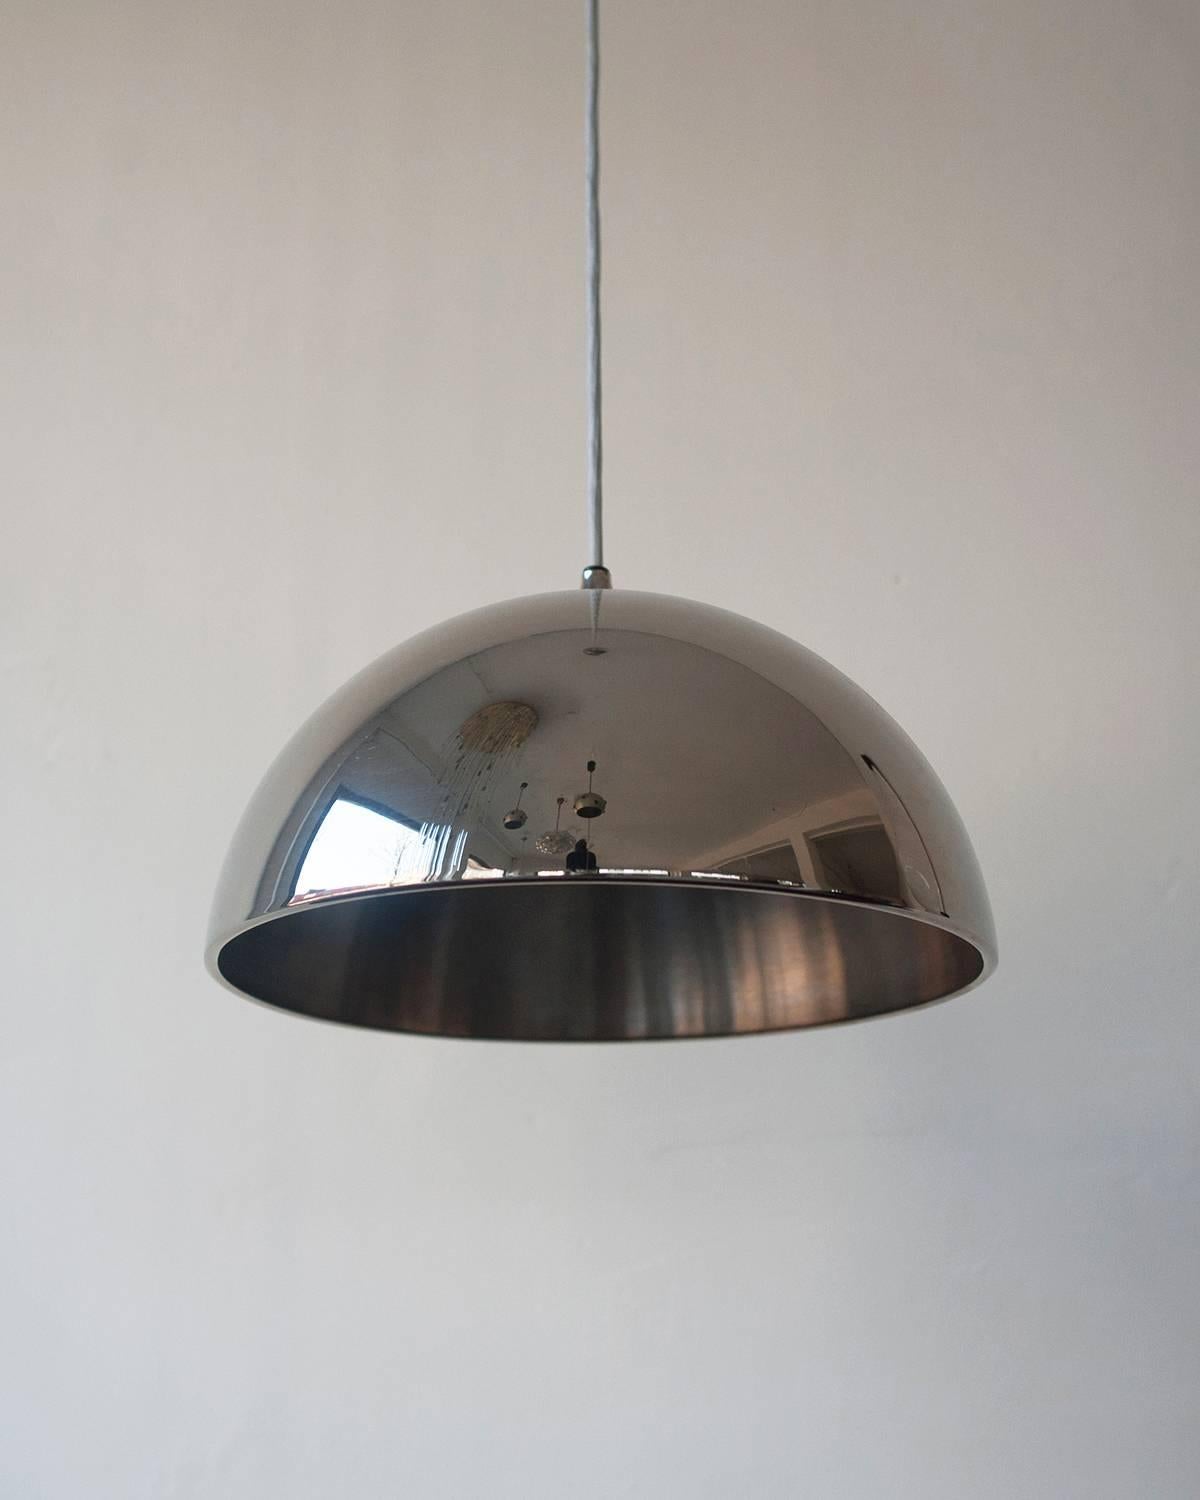 Metal chromed dome pendant by Florian Schulz is a unique form of art and jewelry. Excellent vintage condition. Overall height is adjustable.